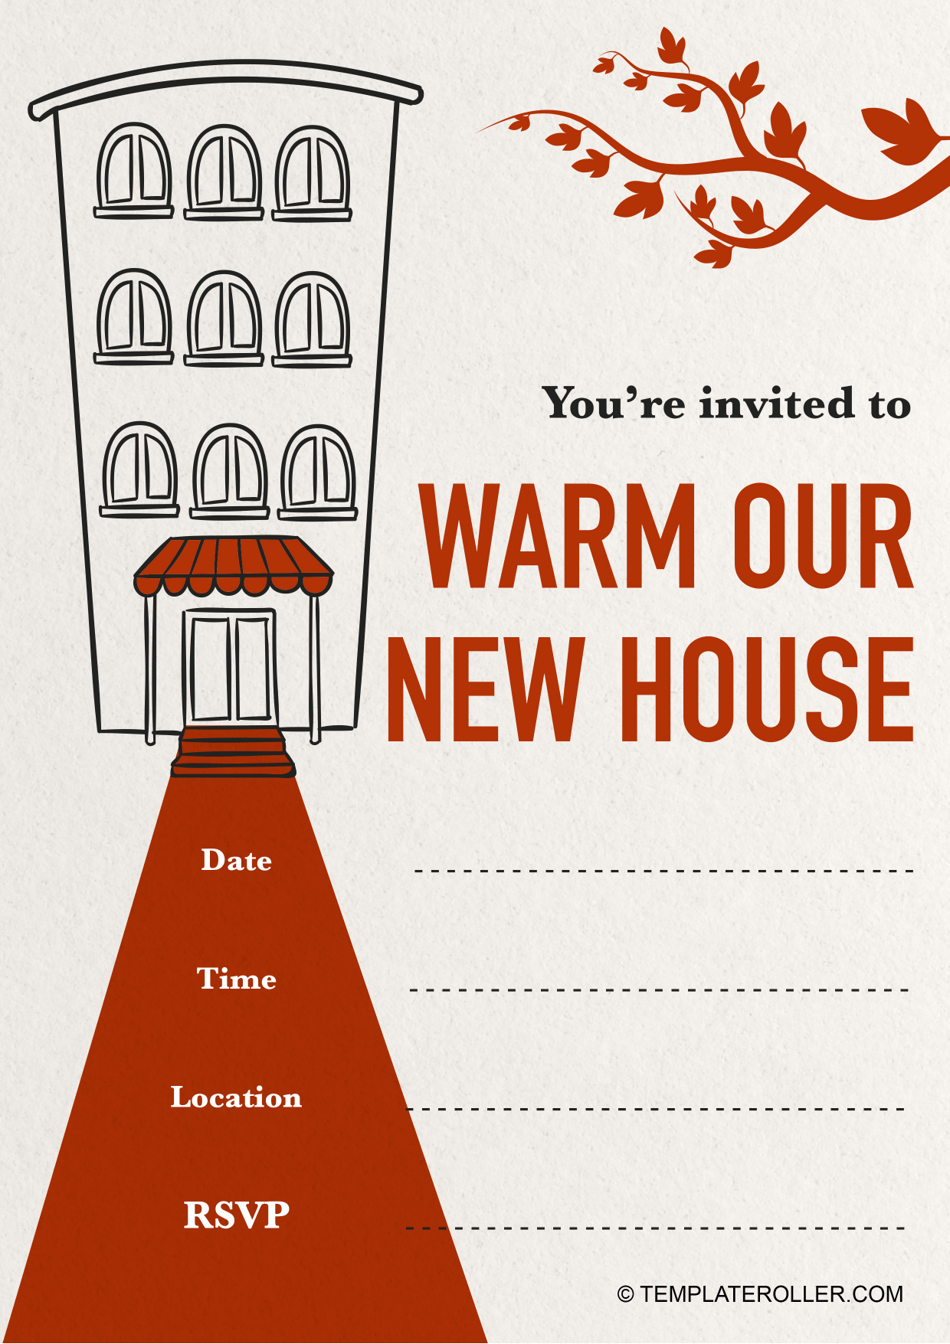 Housewarming Party Invitation Template - Home, Page 1